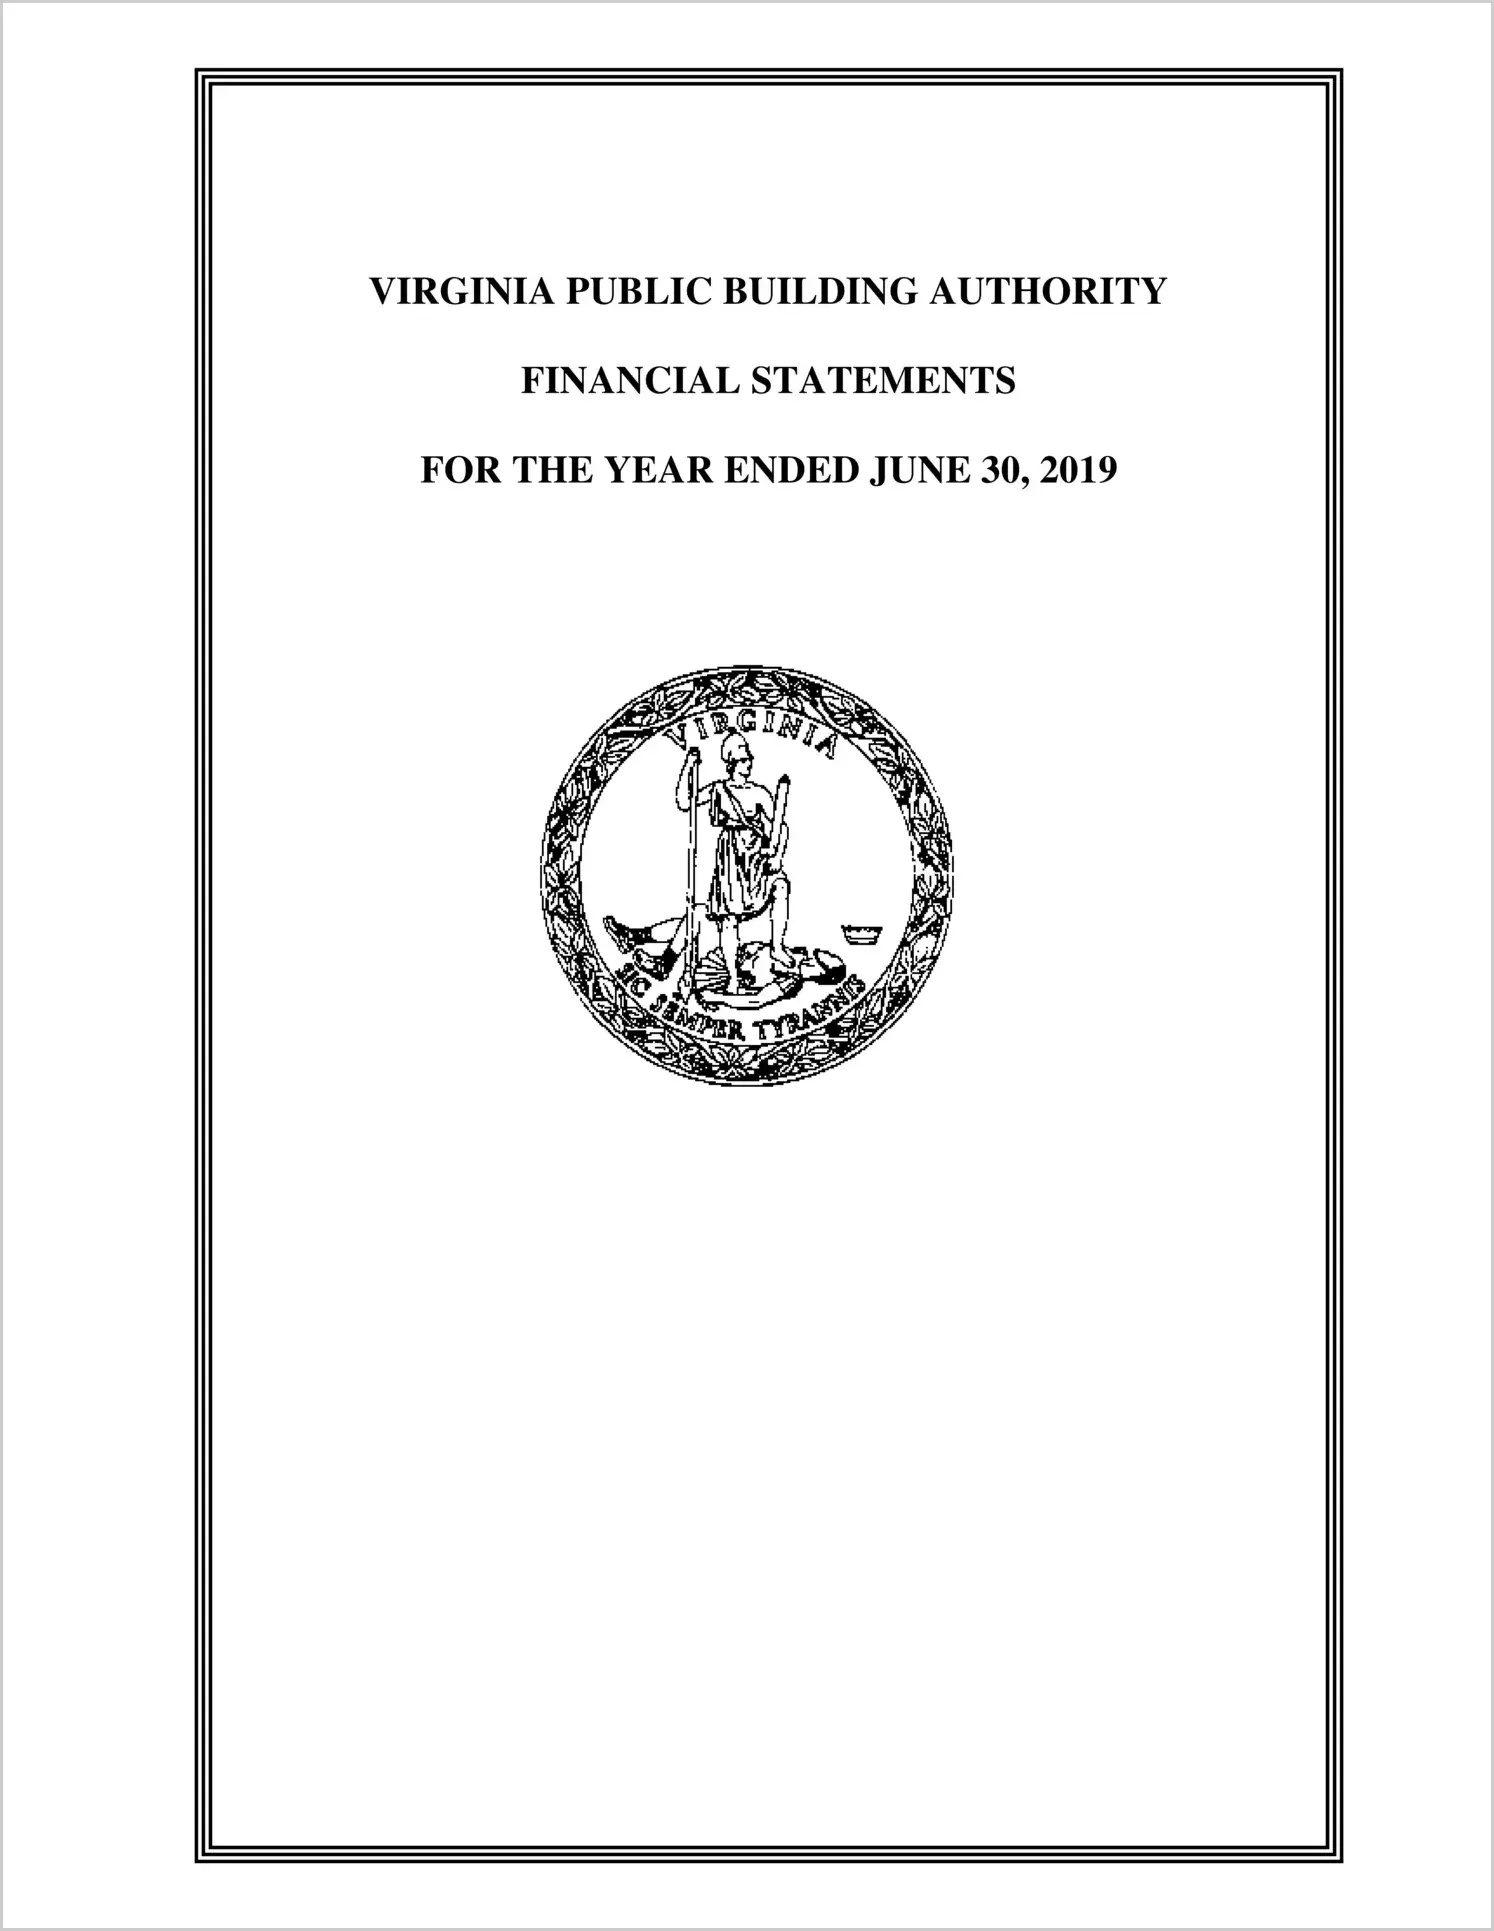 Virginia Public Building Authority Financial Statements for the year ended June 30, 2019